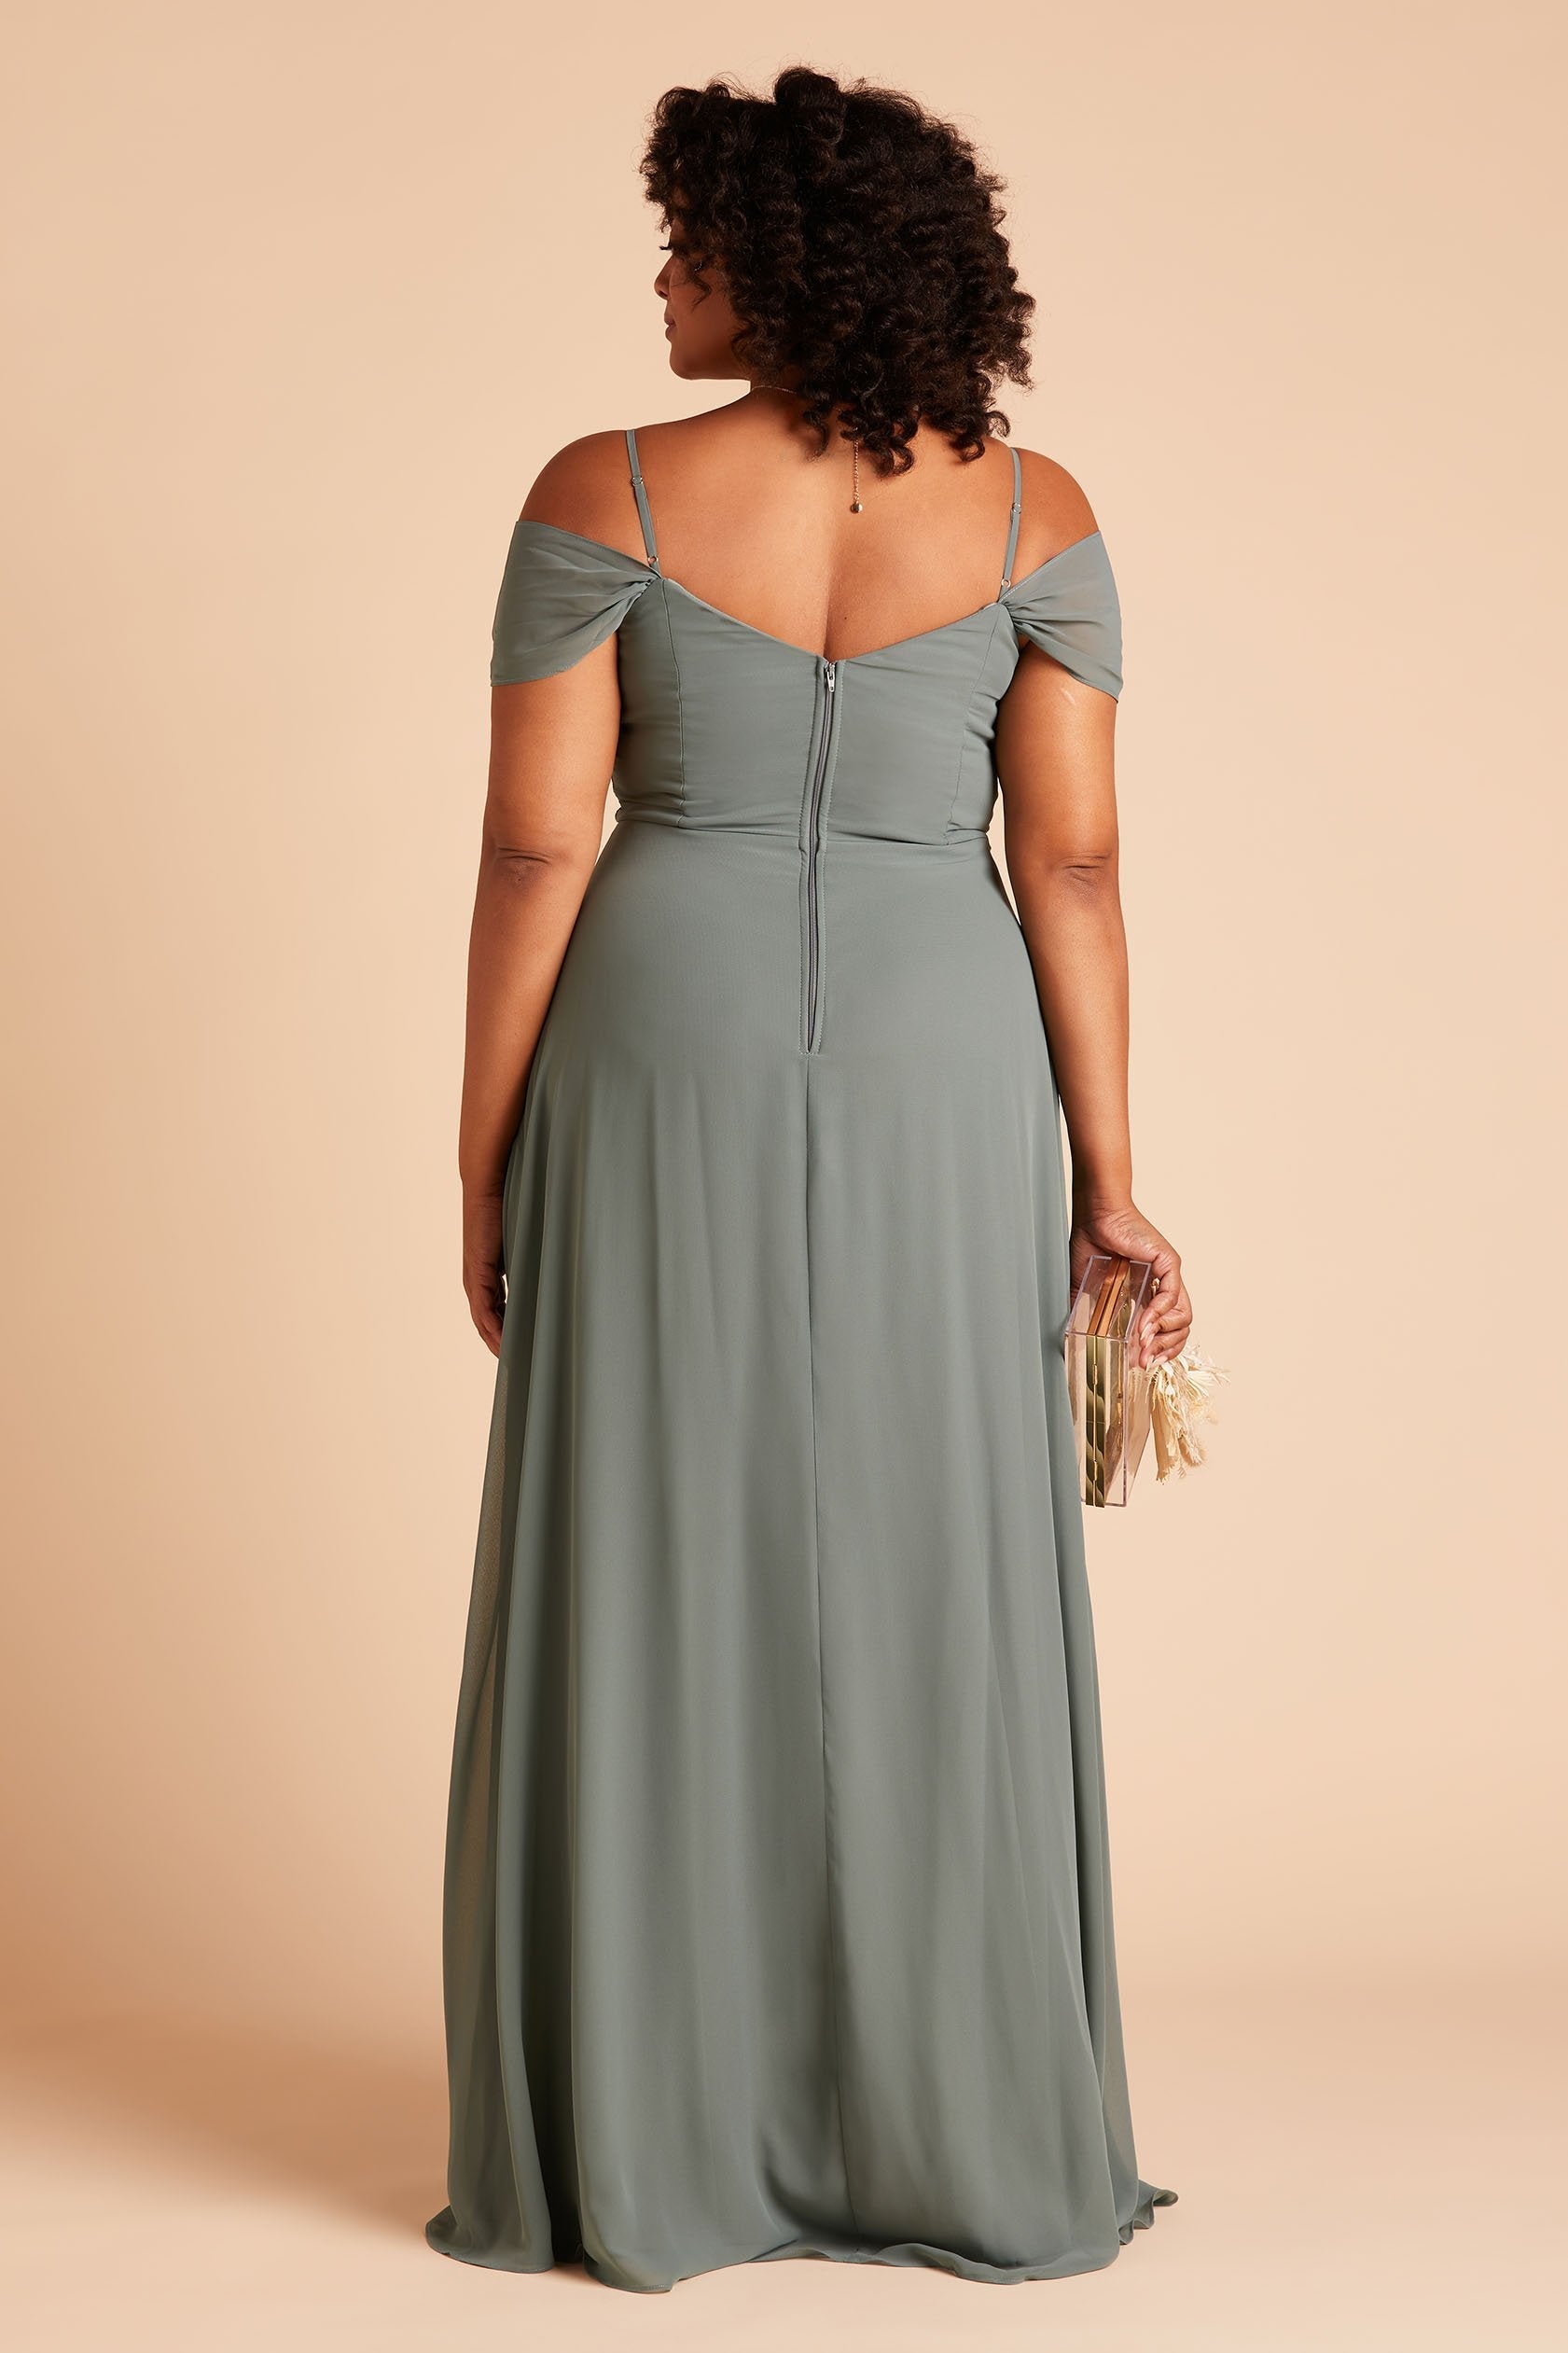 Spence convertible plus size bridesmaid dress in sea glass green chiffon by Birdy Grey, back view